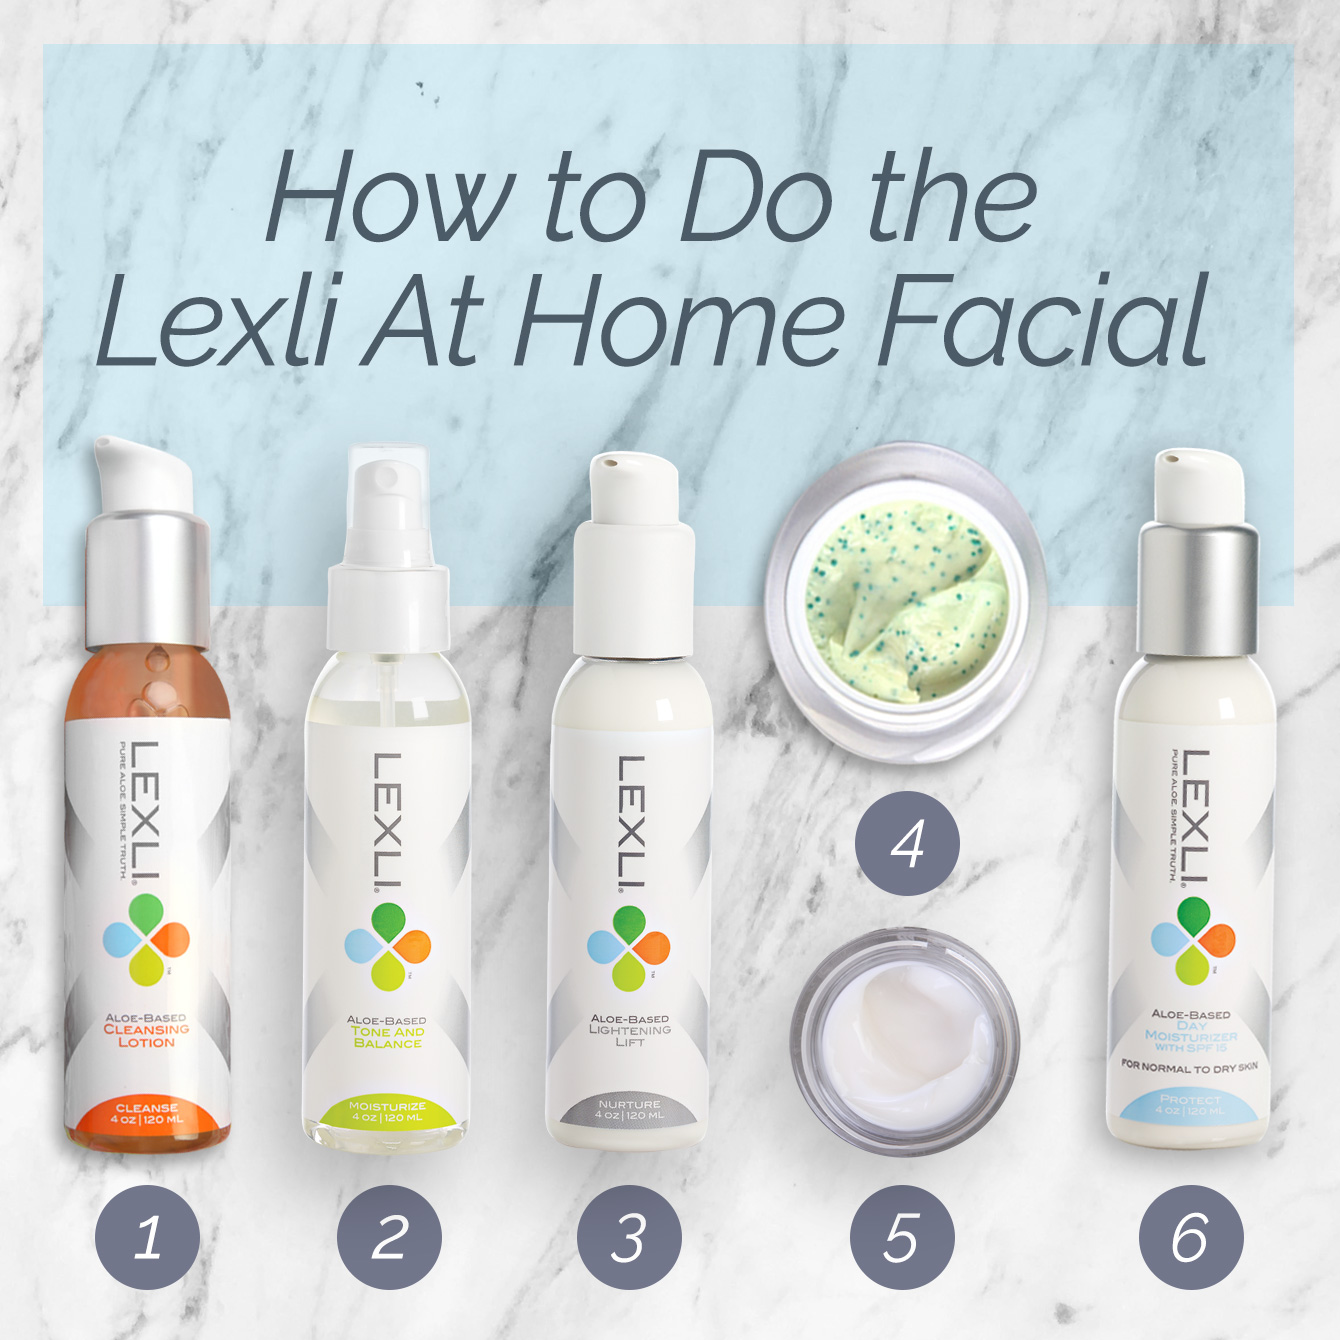 The products in the Lexli At-home Facial: Cleansing Lotoin, Tone & Balance, Lightening Lift, AloeGlyC, Revital-Eyes and Day Moisturizer with SPF 15